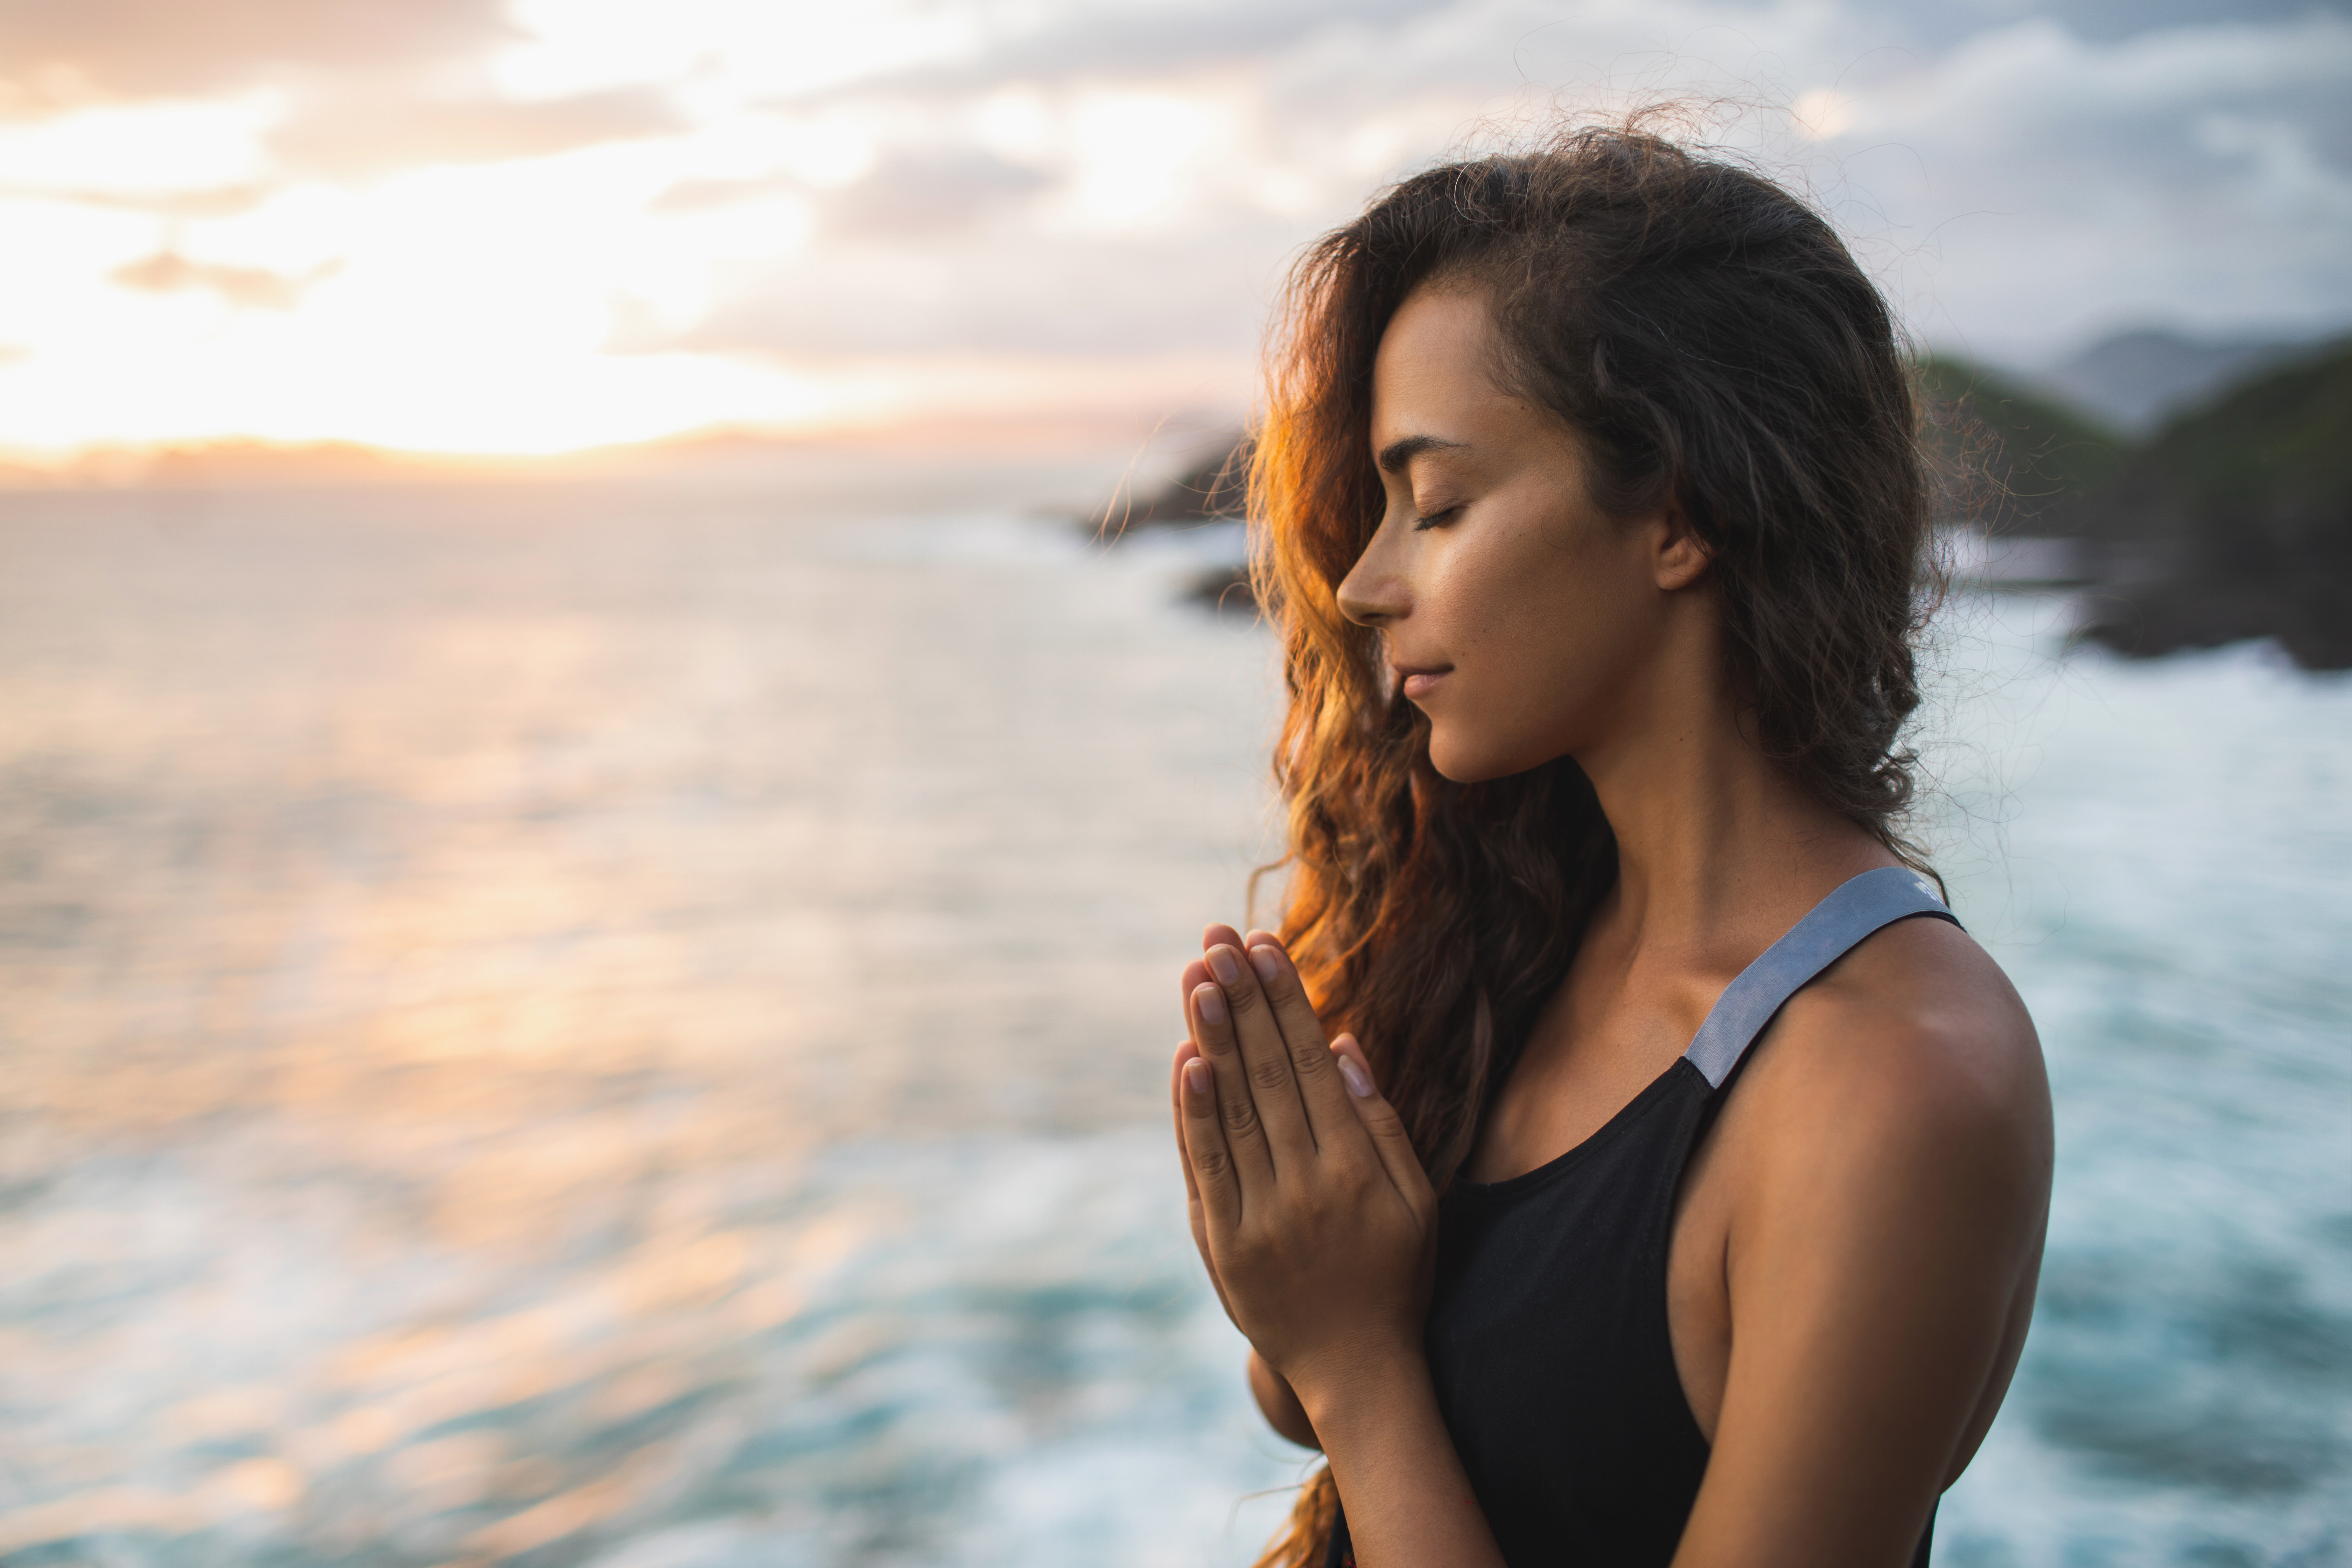 A young woman praying and meditating | Source: Shutterstock